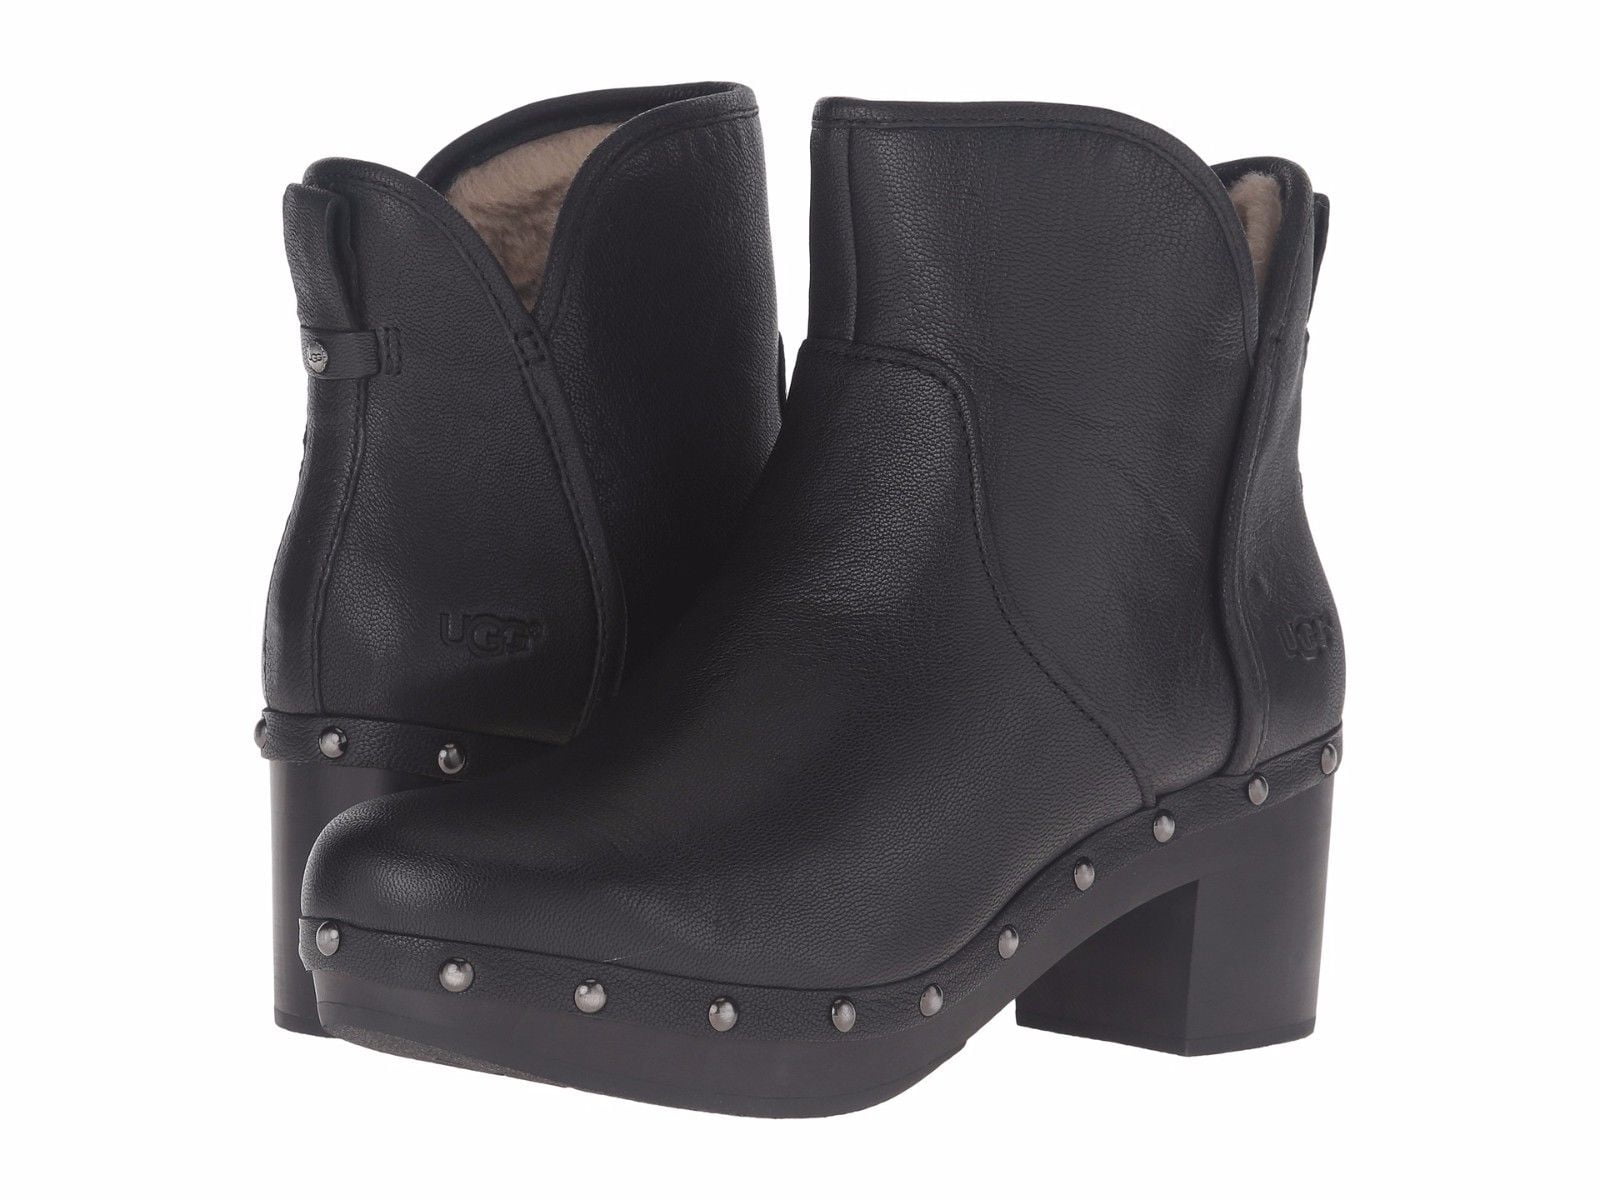 Buy > uggs clog boots > in stock